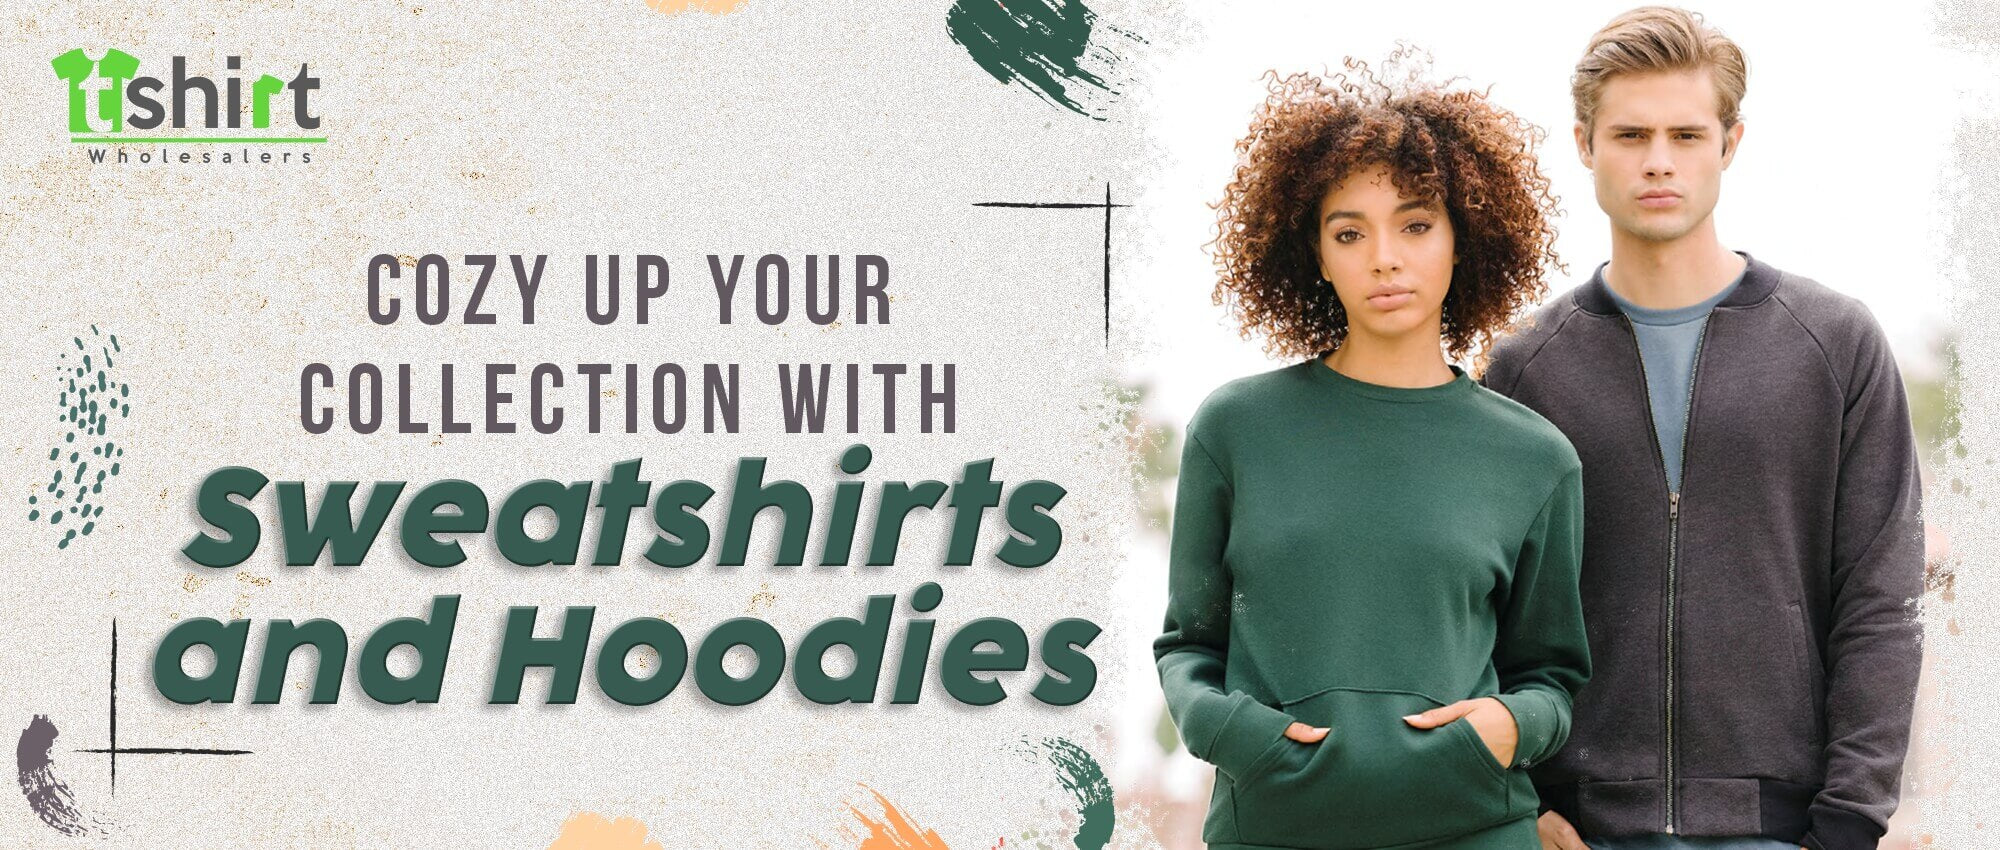 COZY UP YOUR COLLECTION WITH SWEATSHIRTS AND HOODIES